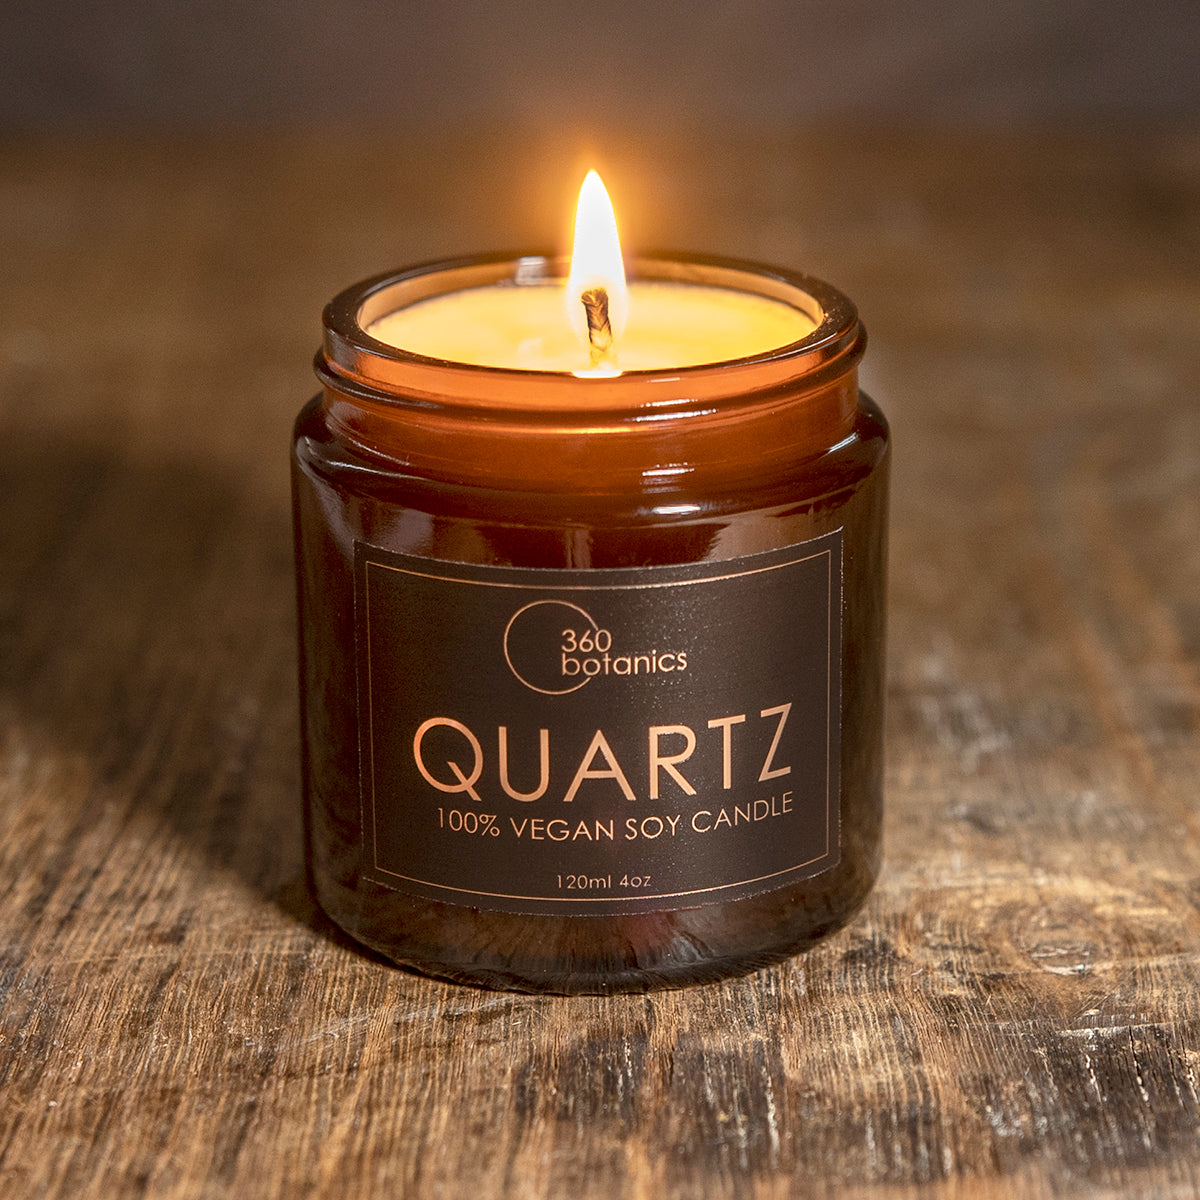  A lit soy candle with a single wick burns brightly within a small brown glass jar on a rustic wooden surface. The label on the jar clearly states "360 Botanics QUARTZ 100% Vegan Soy Candle, 120ml 4oz", highlighting the candle's brand and vegan quality. The warm light of the candle casts a soft glow on the wood, enhancing the cozy atmosphere.